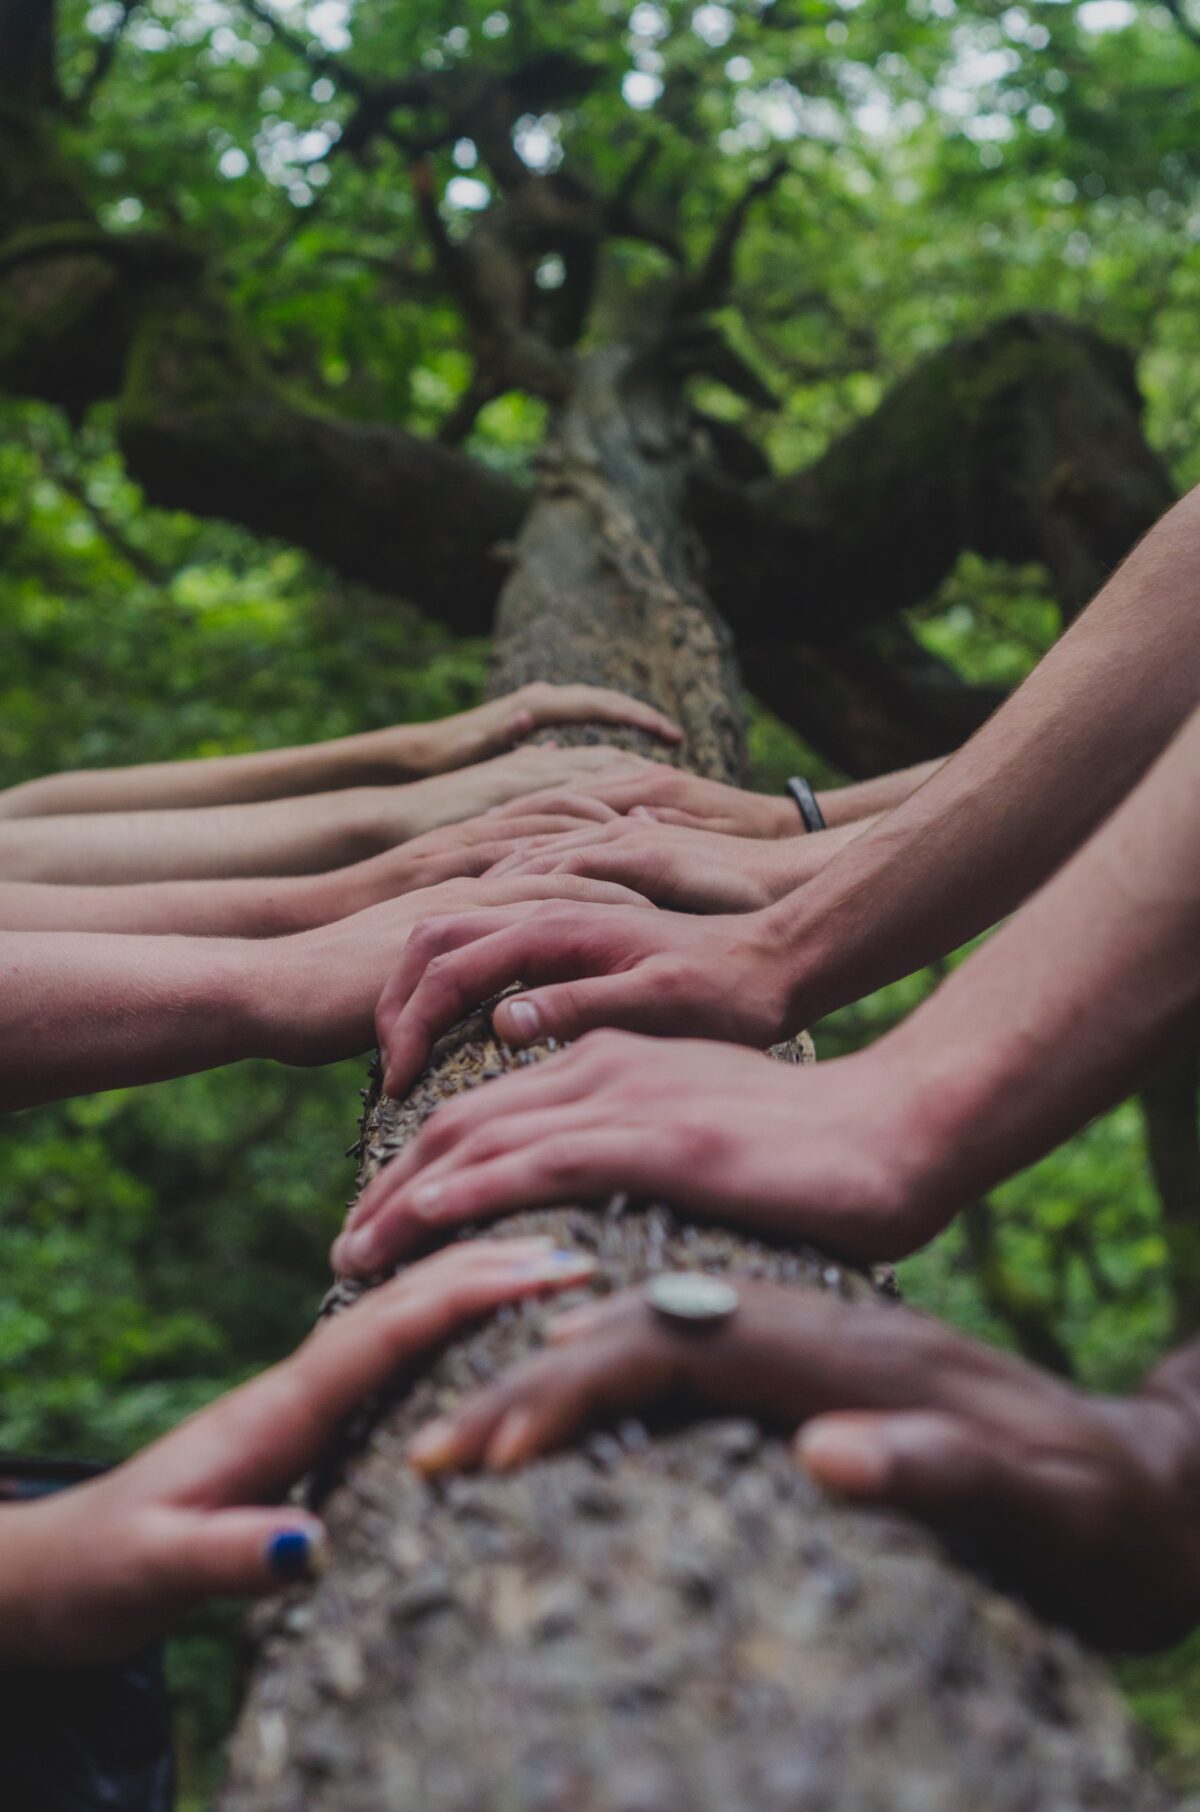 available support for adult adoptees - hands on tree to depict the struggle adult adoptees face